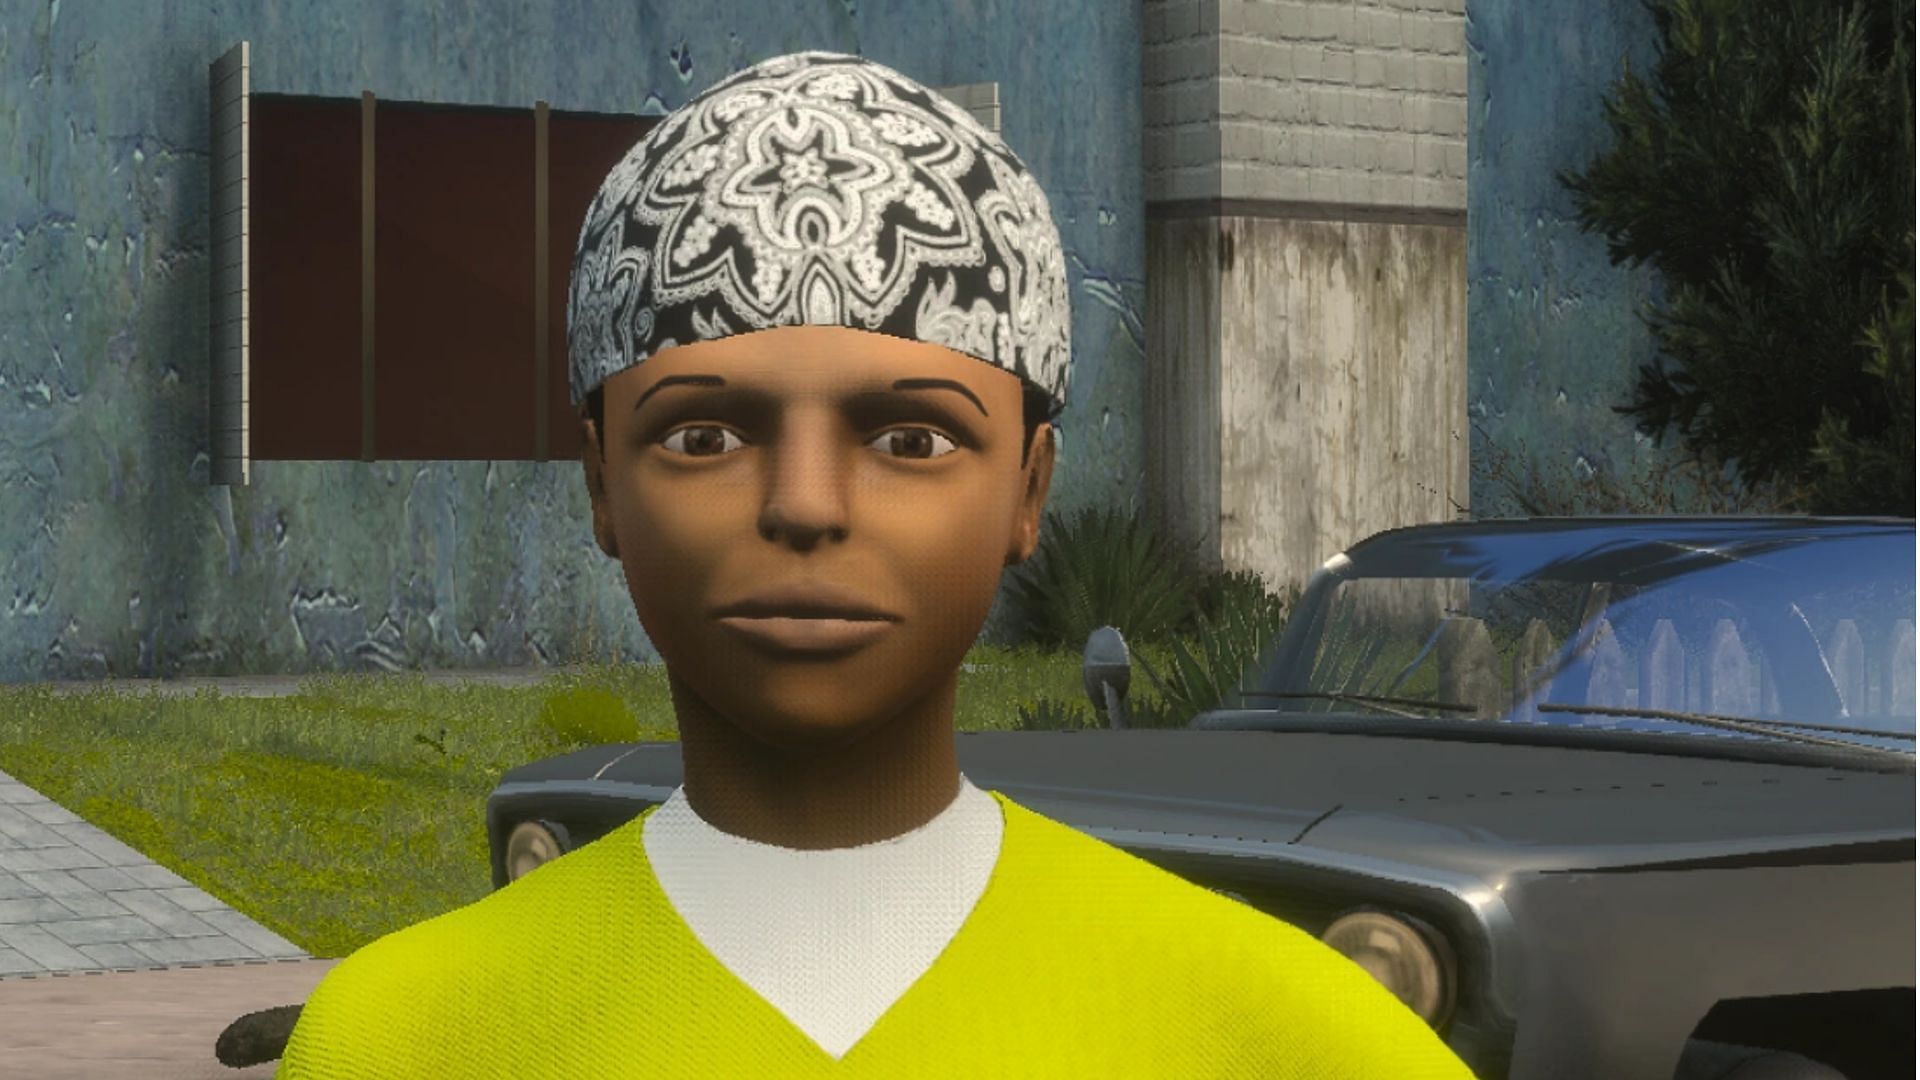 Denise looks much worse here than in the original San Andreas (Image via Rockstar Games)